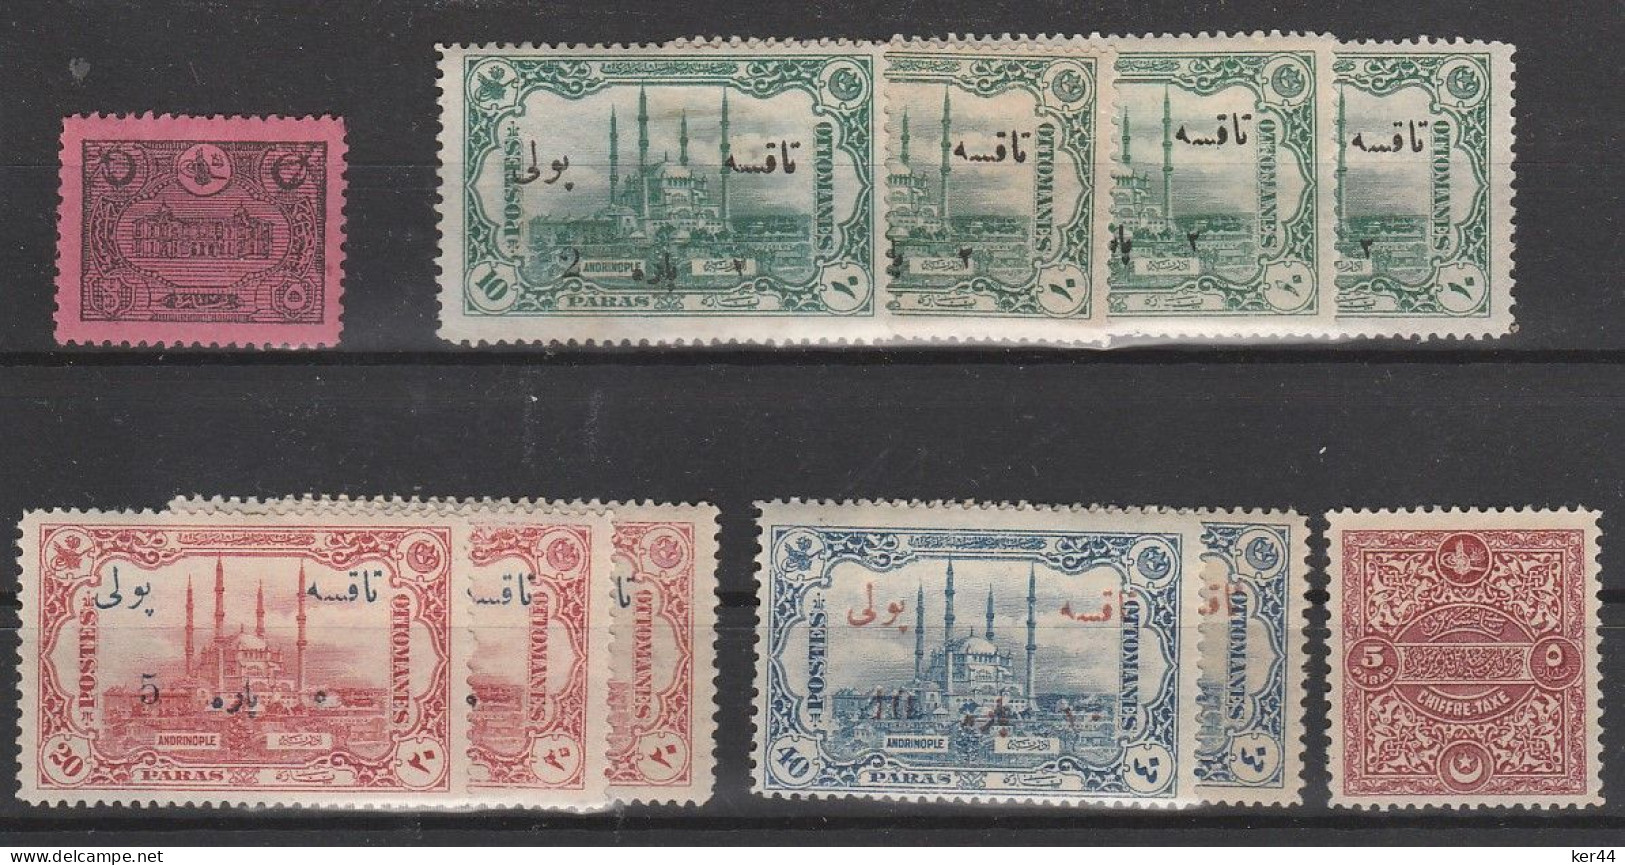 Taxe_Lot De 11 Timbres */NSG -  Revenue Stamps Lot_MH/MNG - Timbres-taxe